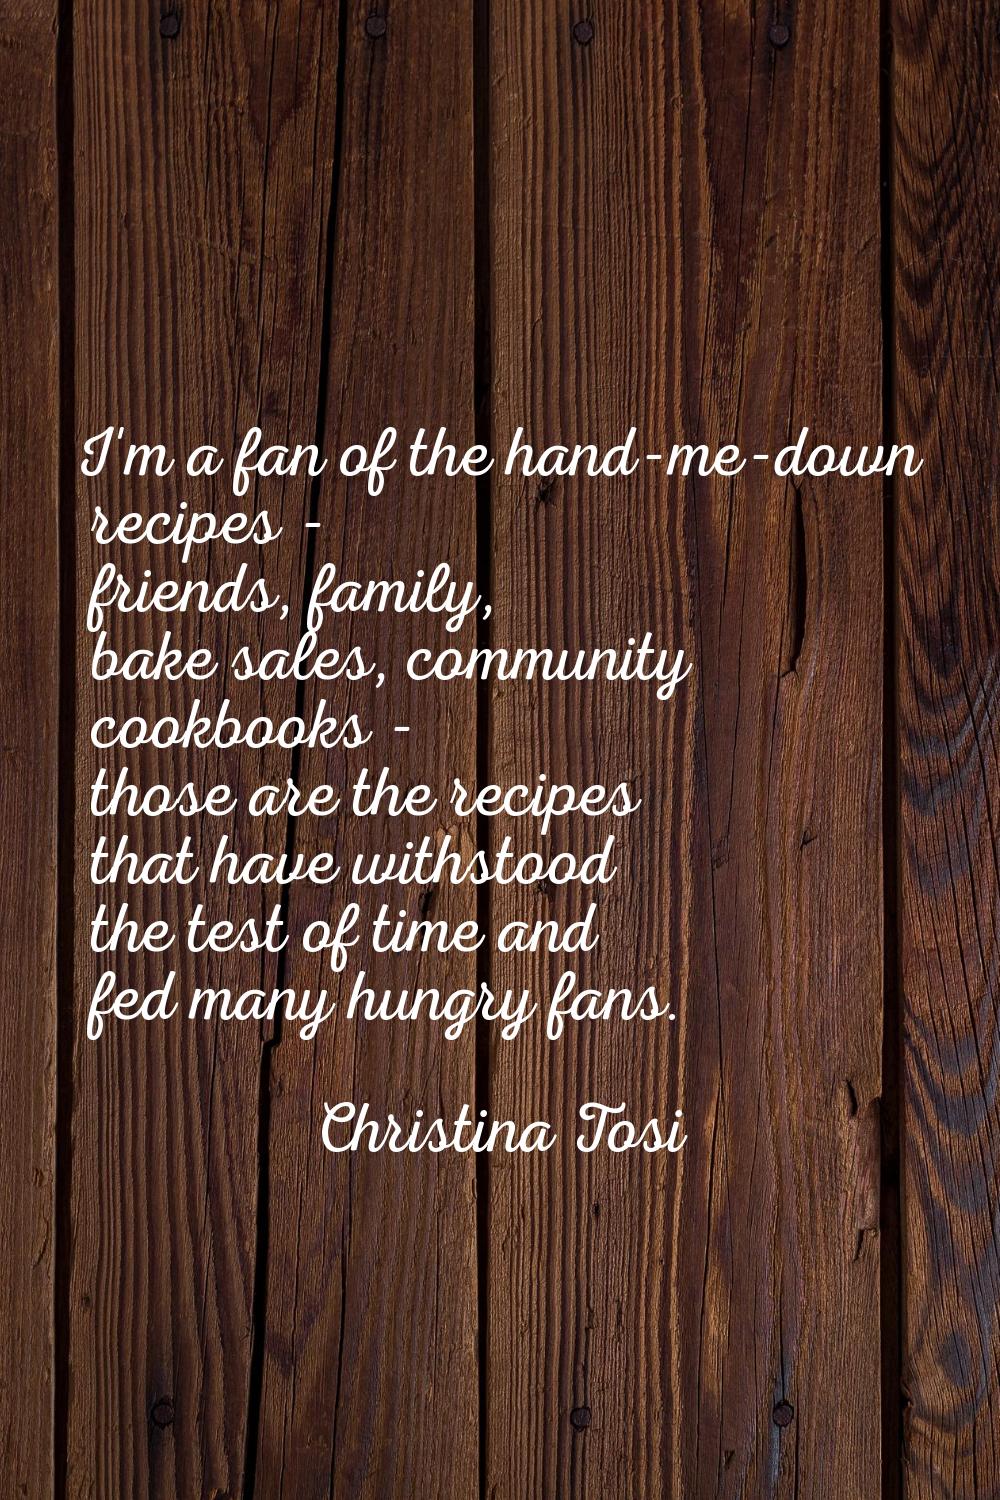 I'm a fan of the hand-me-down recipes - friends, family, bake sales, community cookbooks - those ar